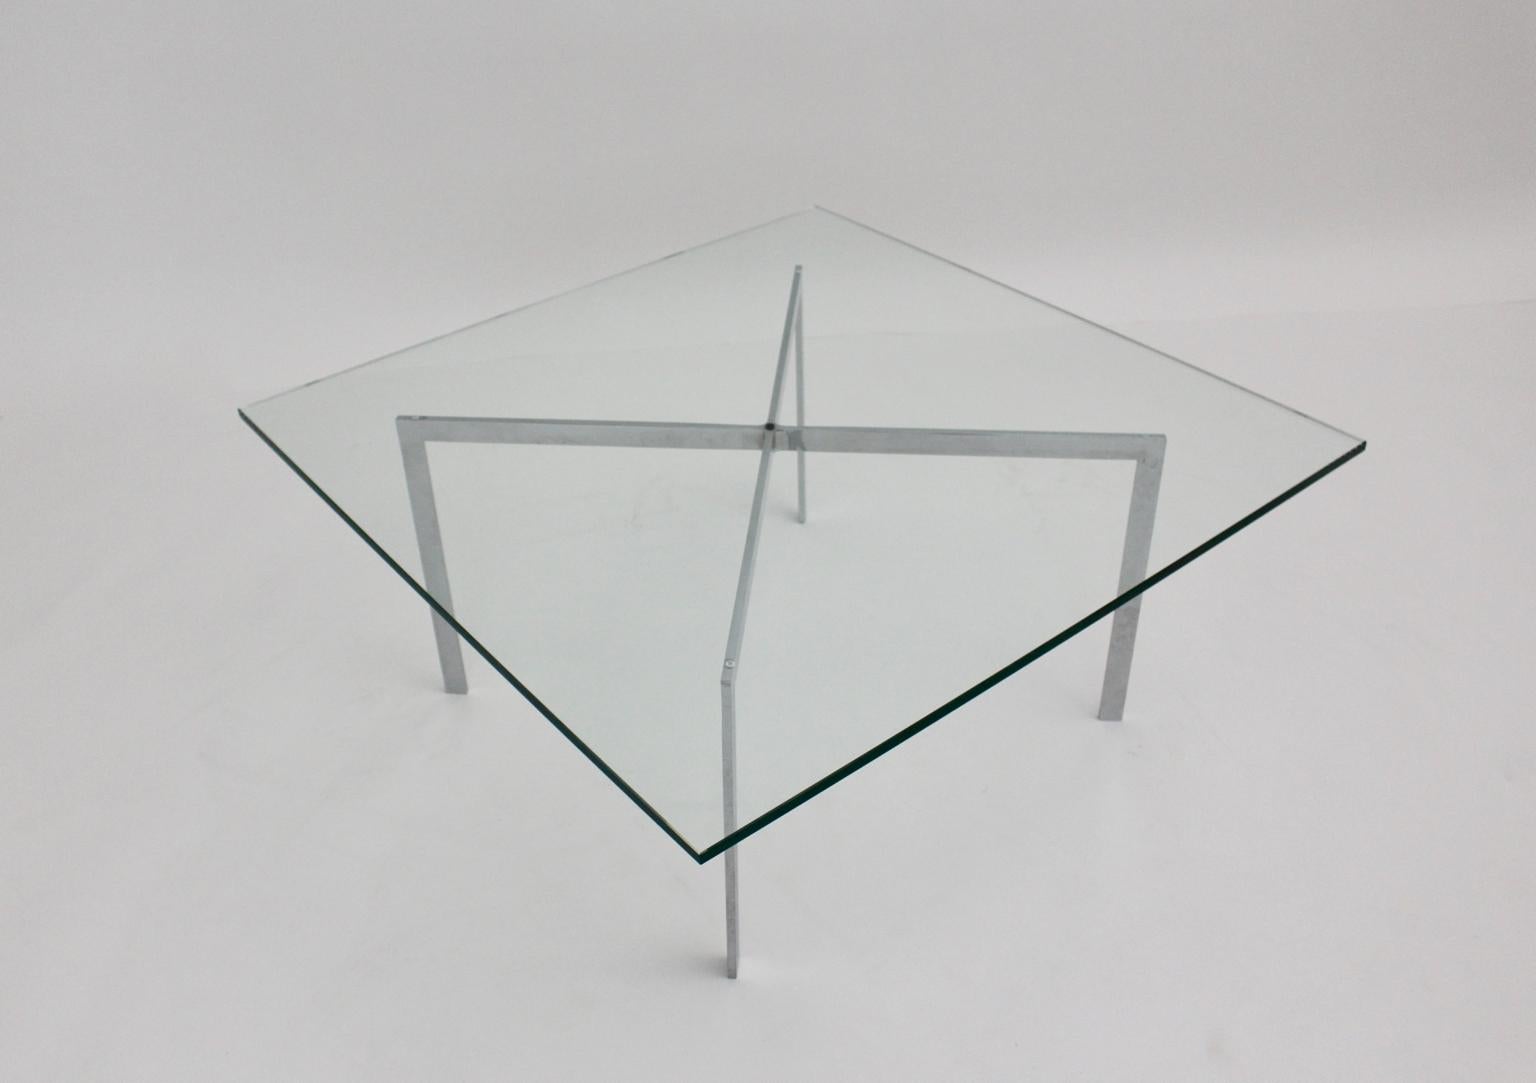 Bauhaus Vintage Chrome Glass Coffee Table Barcelona by Mies van der Rohe, 1929 For Sale 2